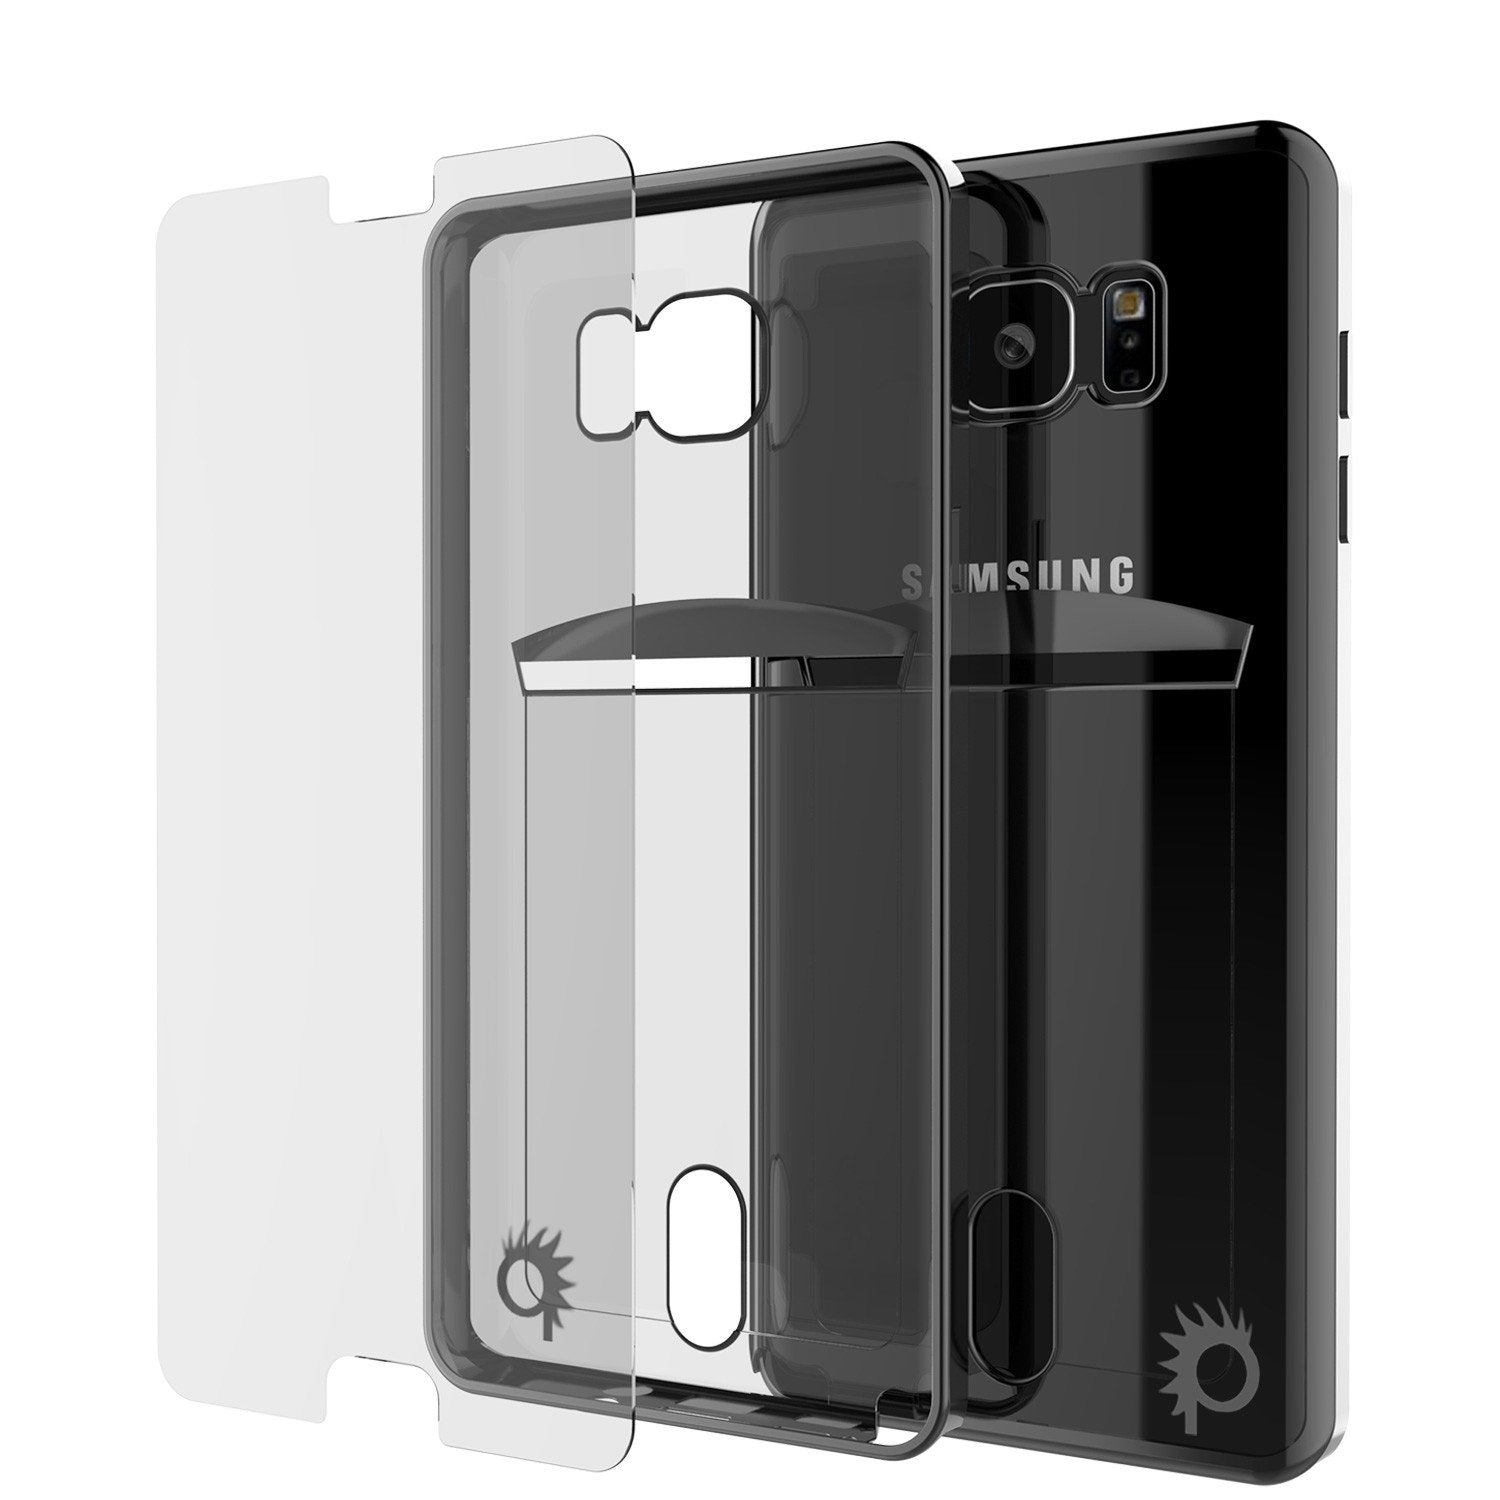 Galaxy Note 5 Case, Punkcase® Lucid Black Series Screen Protector